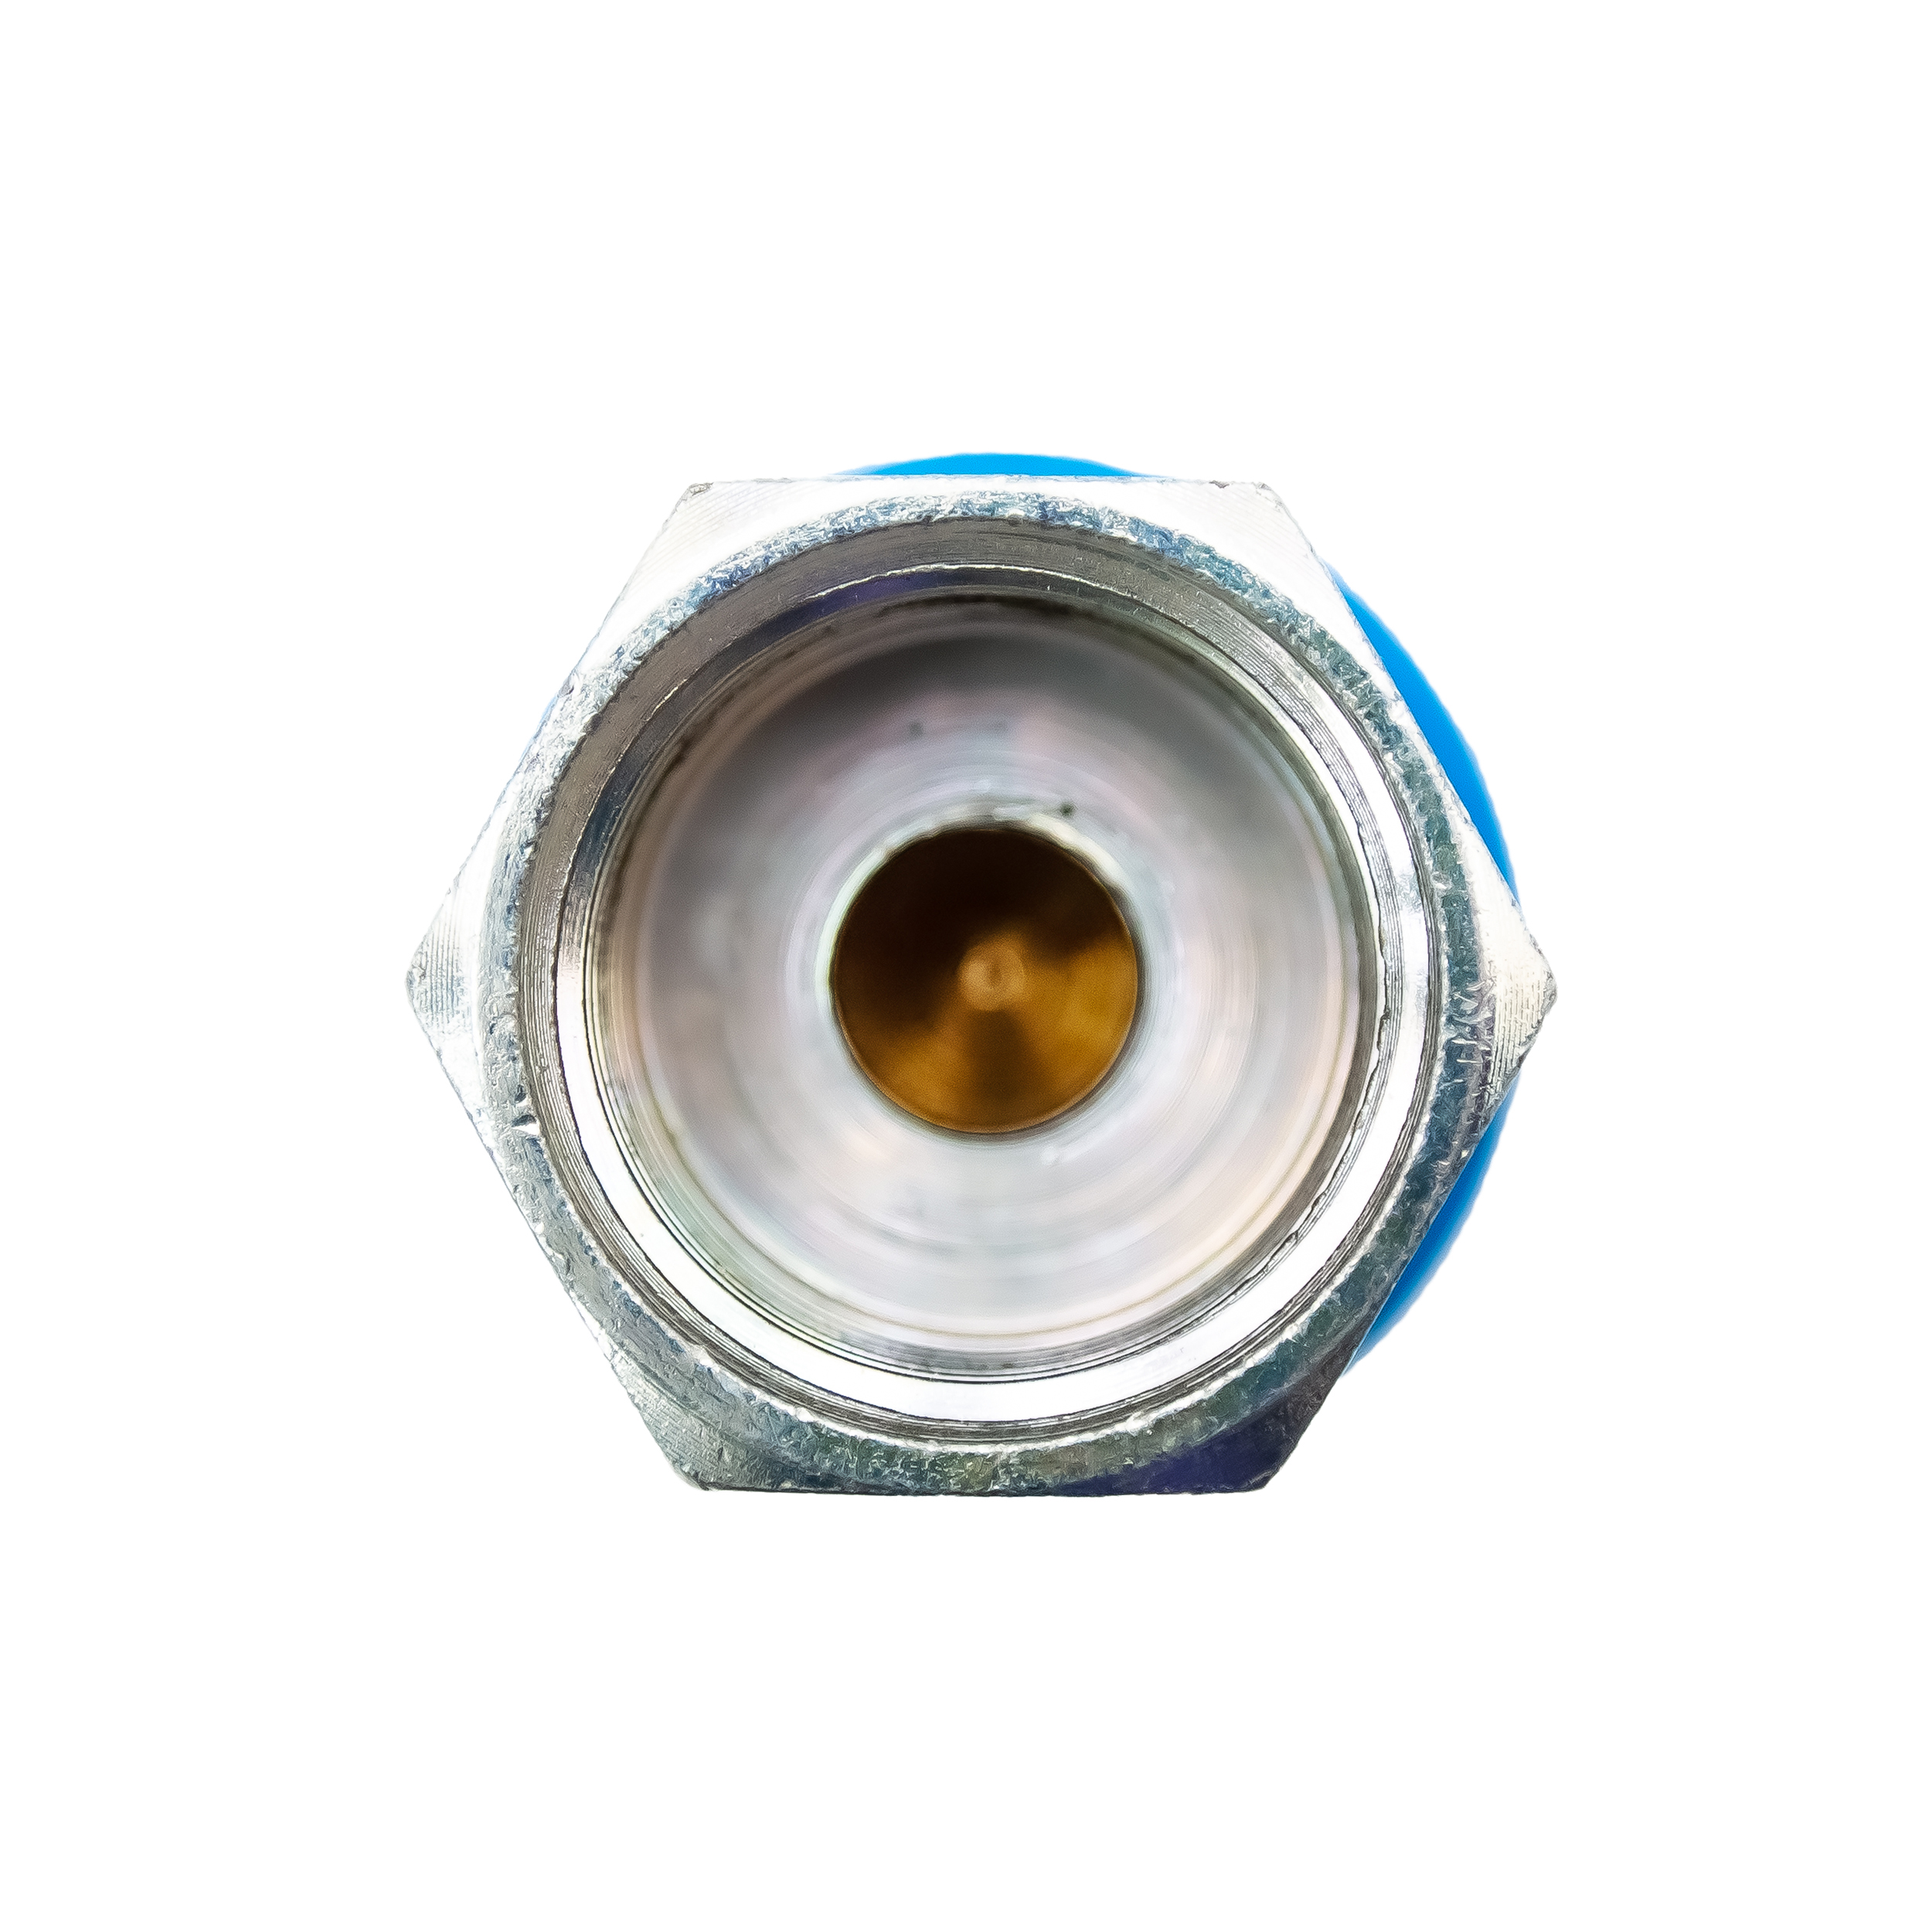 DN 7.8 safety coupling 466, female thread, G ½